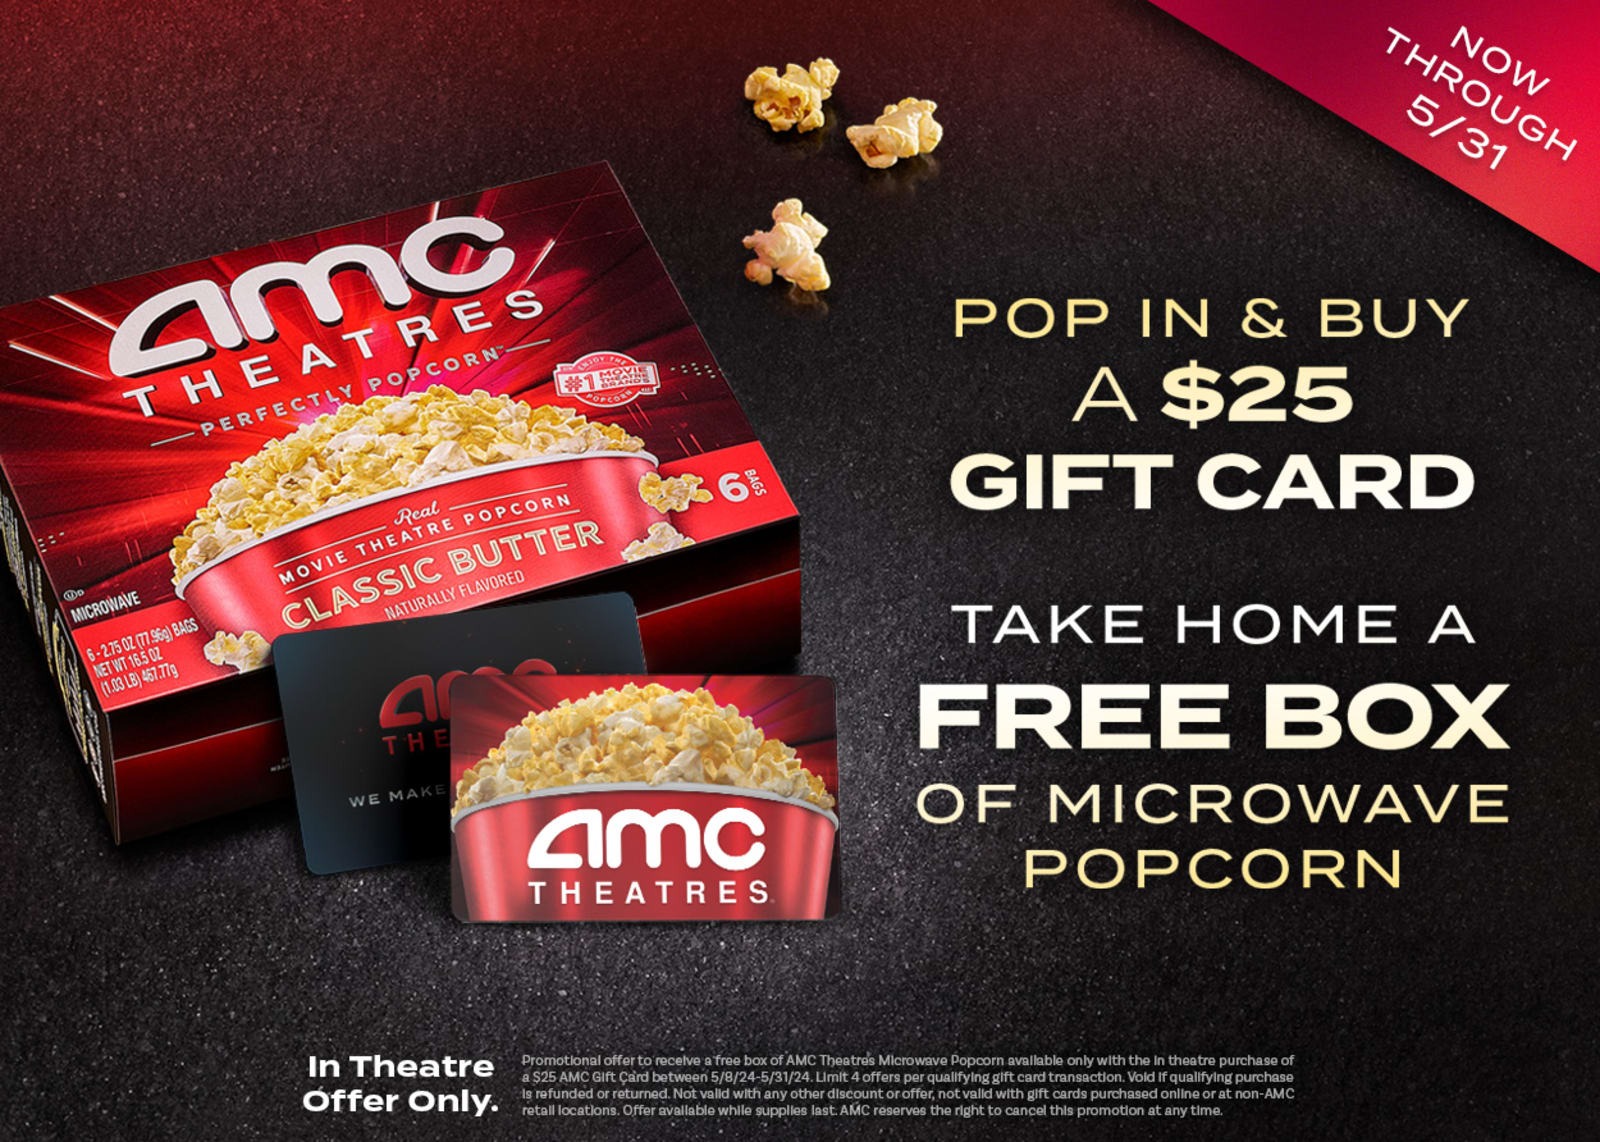 Free Microwave Popcorn with the purchase of a $25 AMC gift card